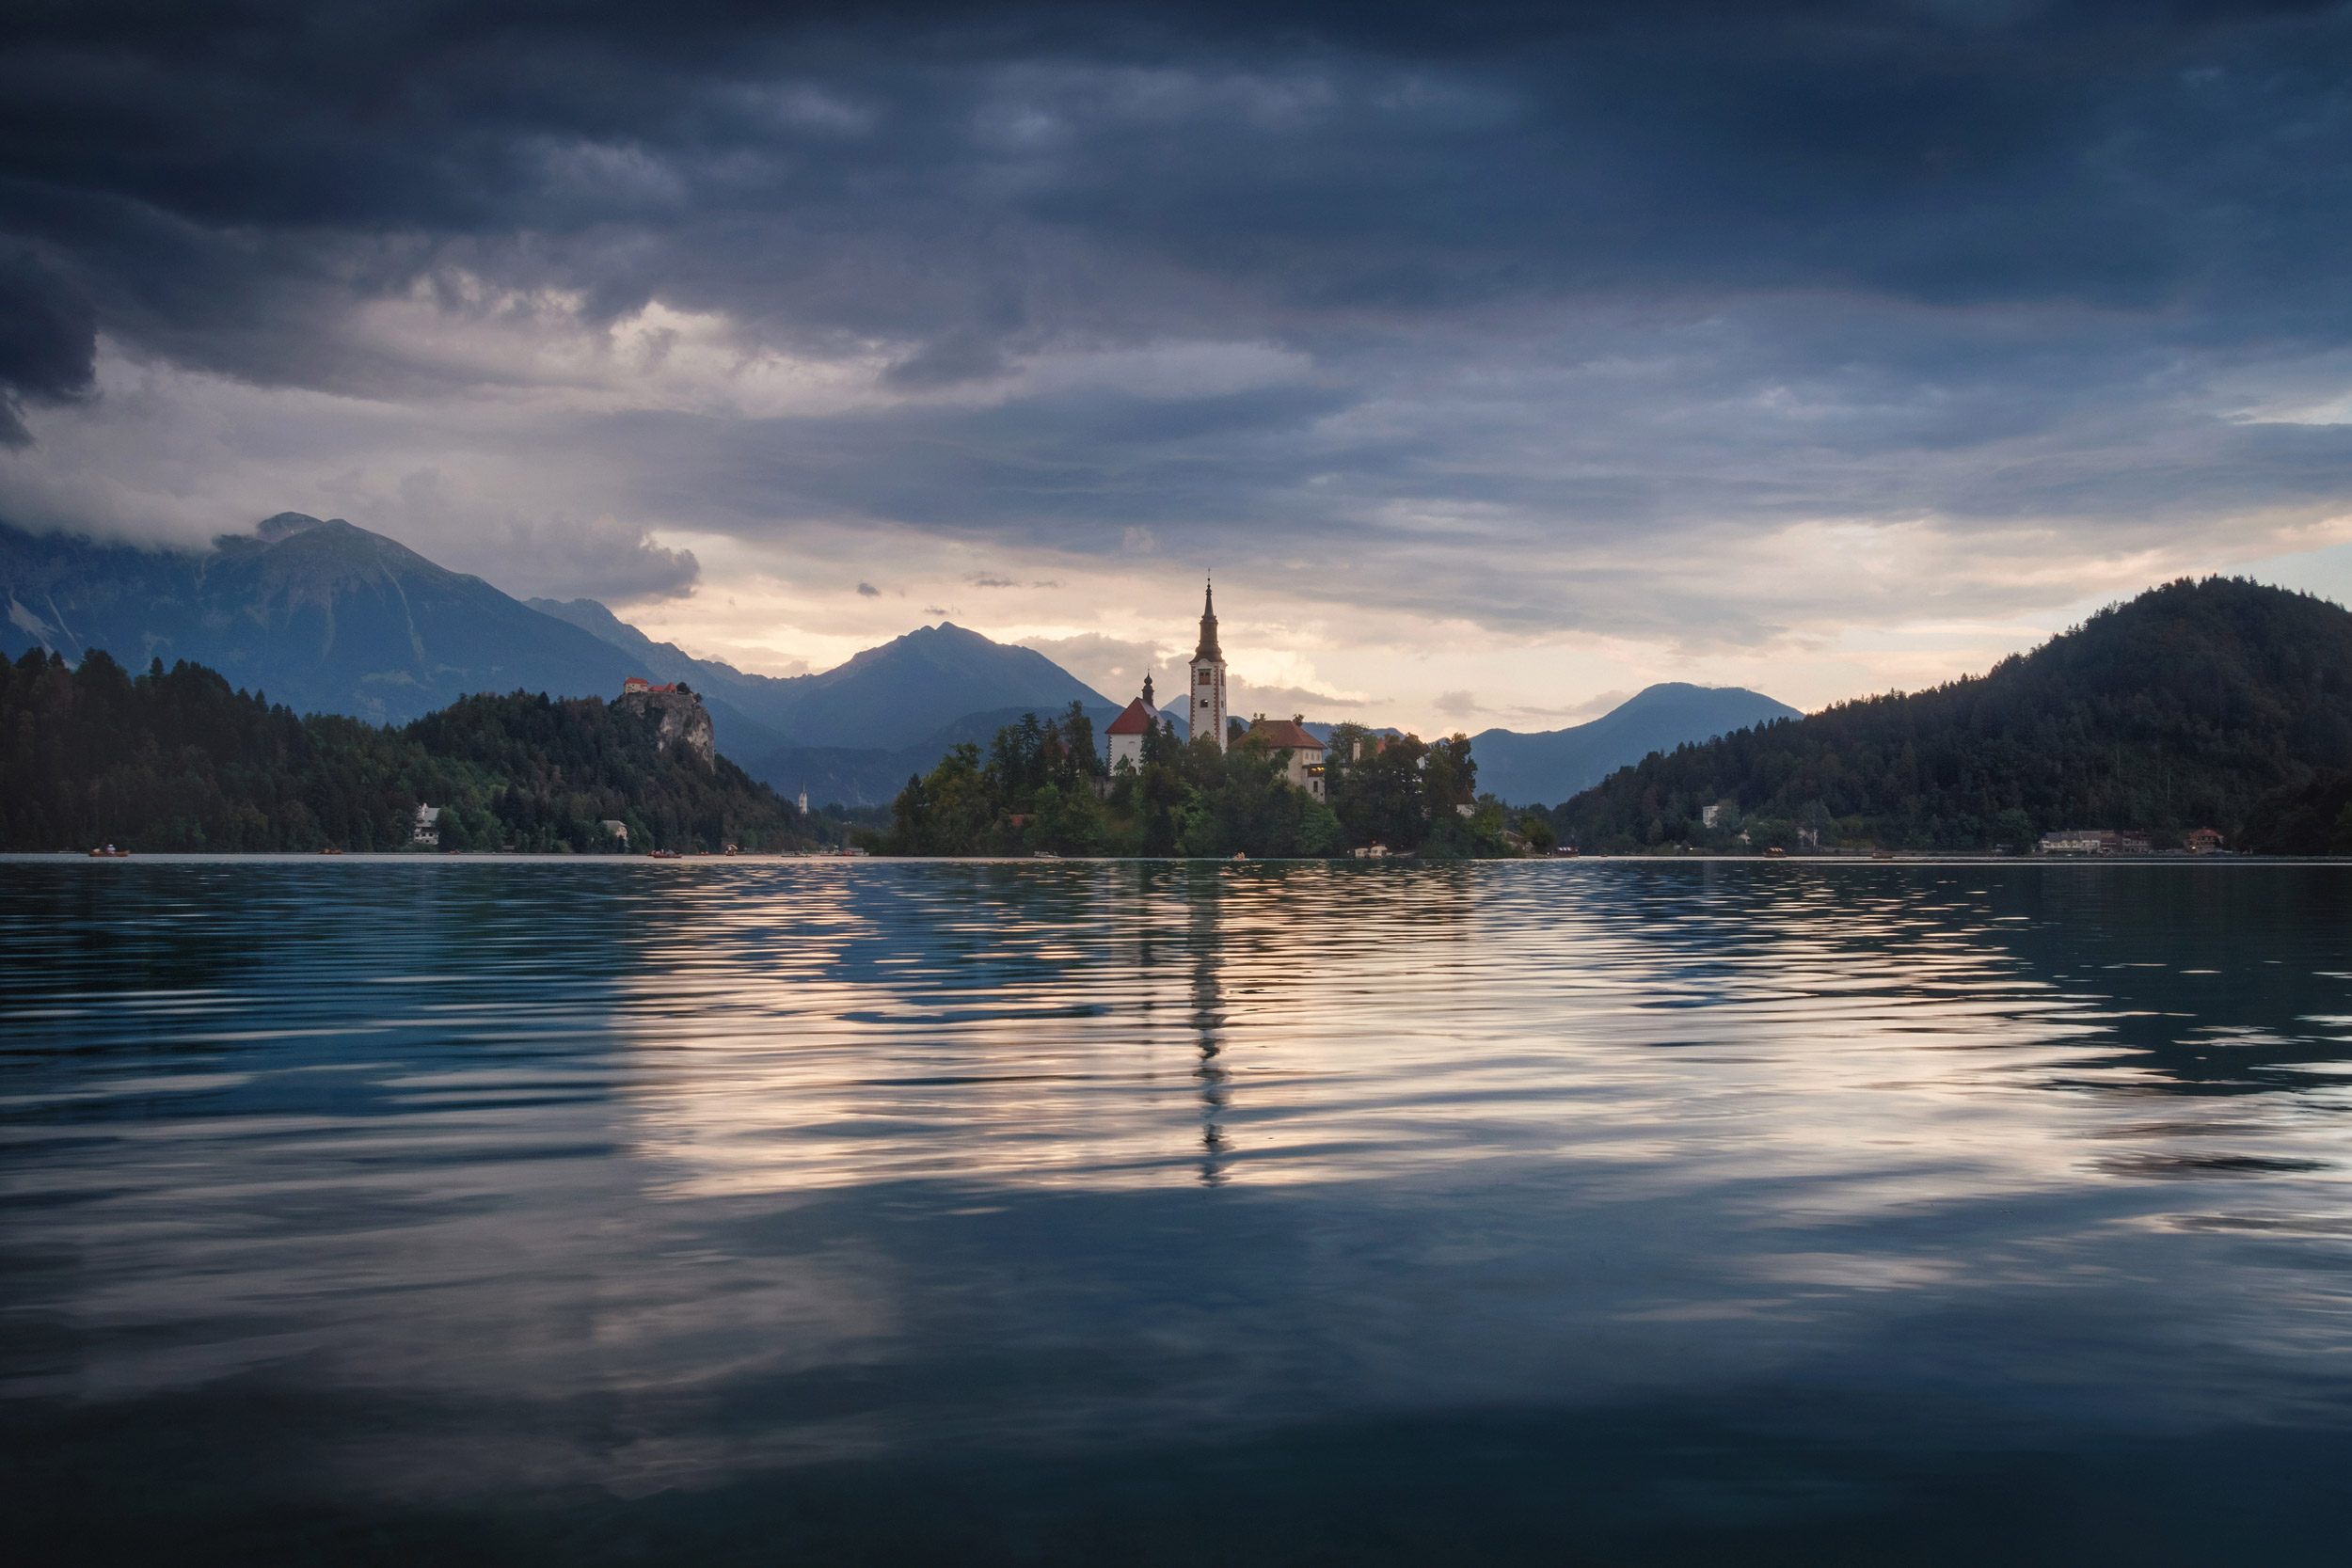 Amazing View On Bled Lake on Sunset. Europe. View on Island with